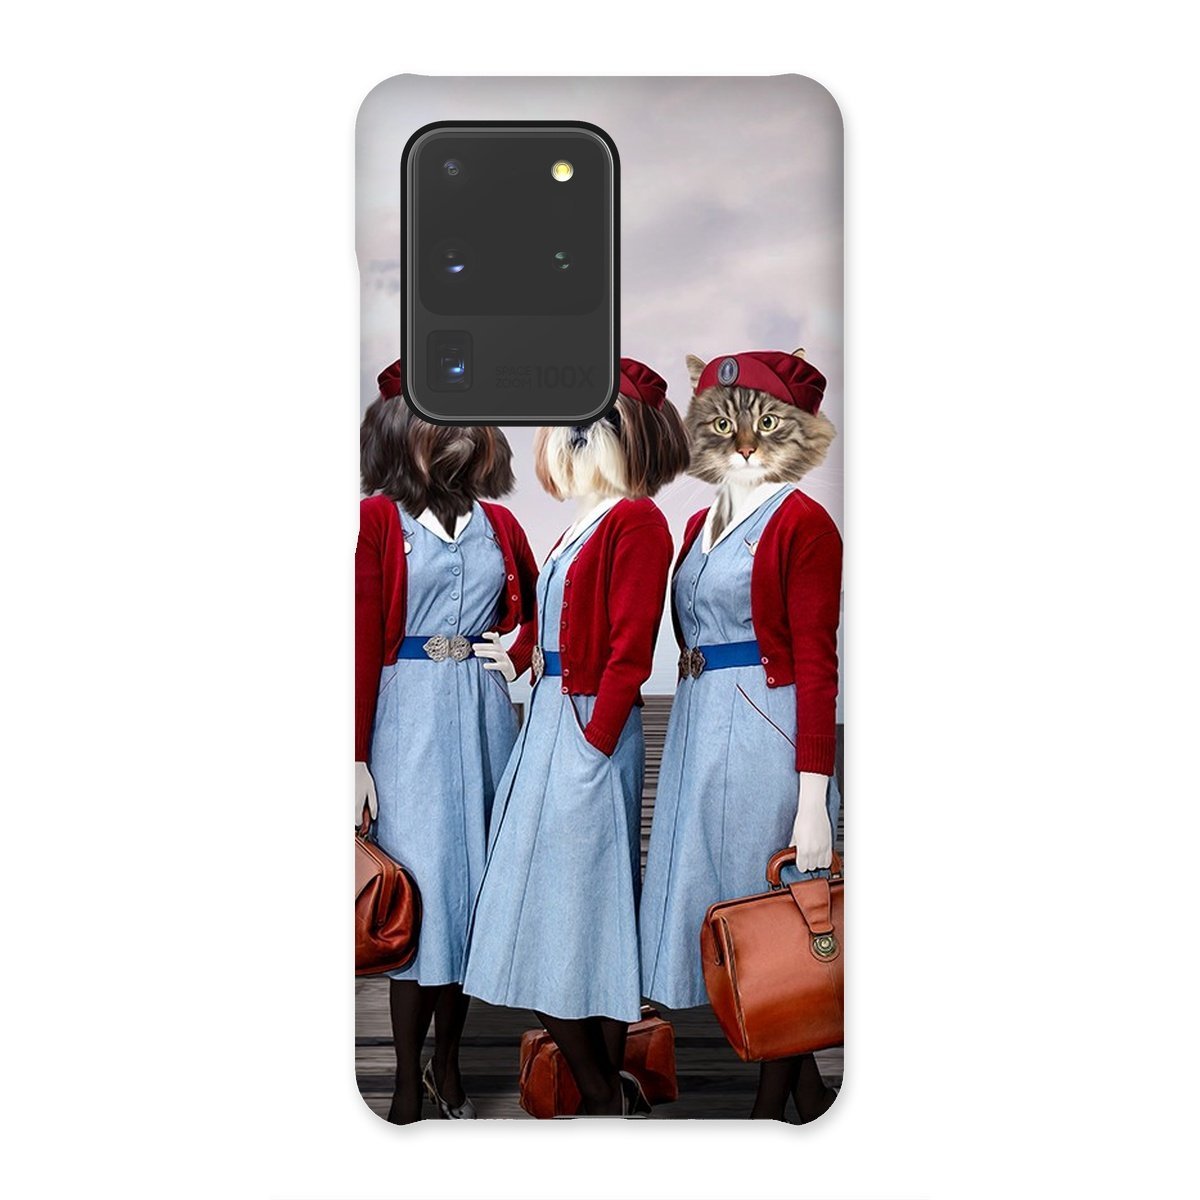 The Midwifes (Call The Midwife Inspired): Custom Pet Phone Case - Paw & Glory - paw and glory, pet portrait phone case, personalised dog phone case uk, puppy phone case, pet phone case, personalized iphone 11 case dogs, custom cat phone case, Pet Portraits phone case,